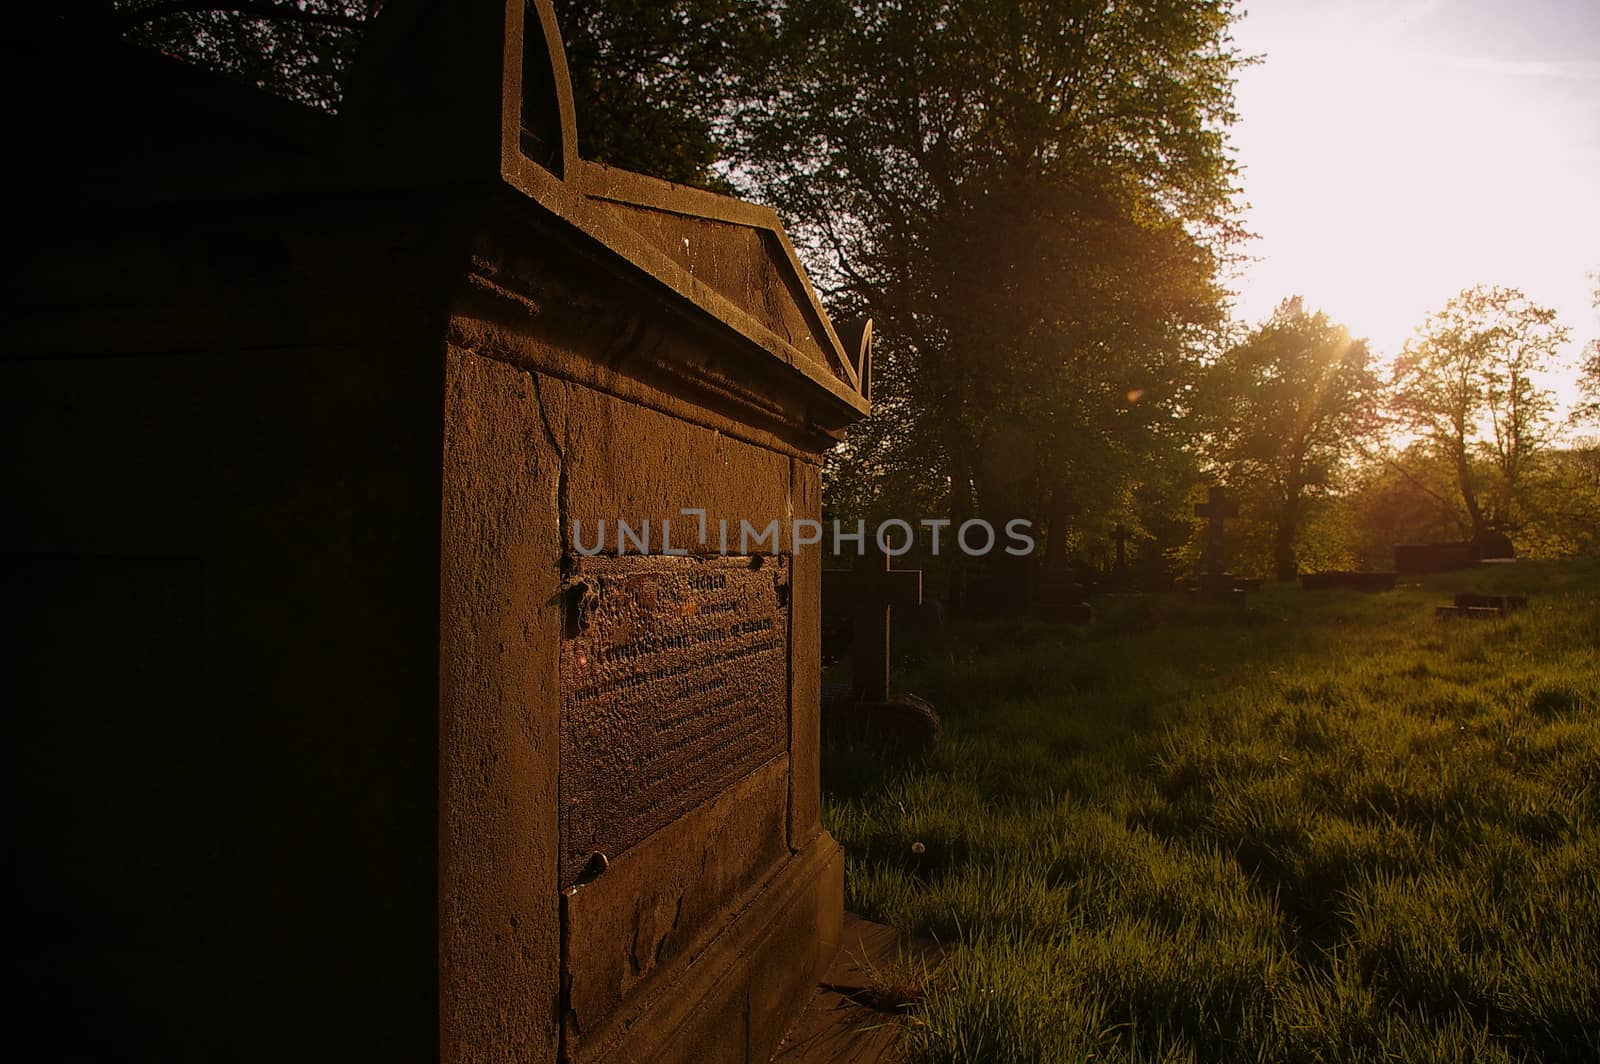 Tomb in the evening sunlight in a Prestwich cemetery, UK